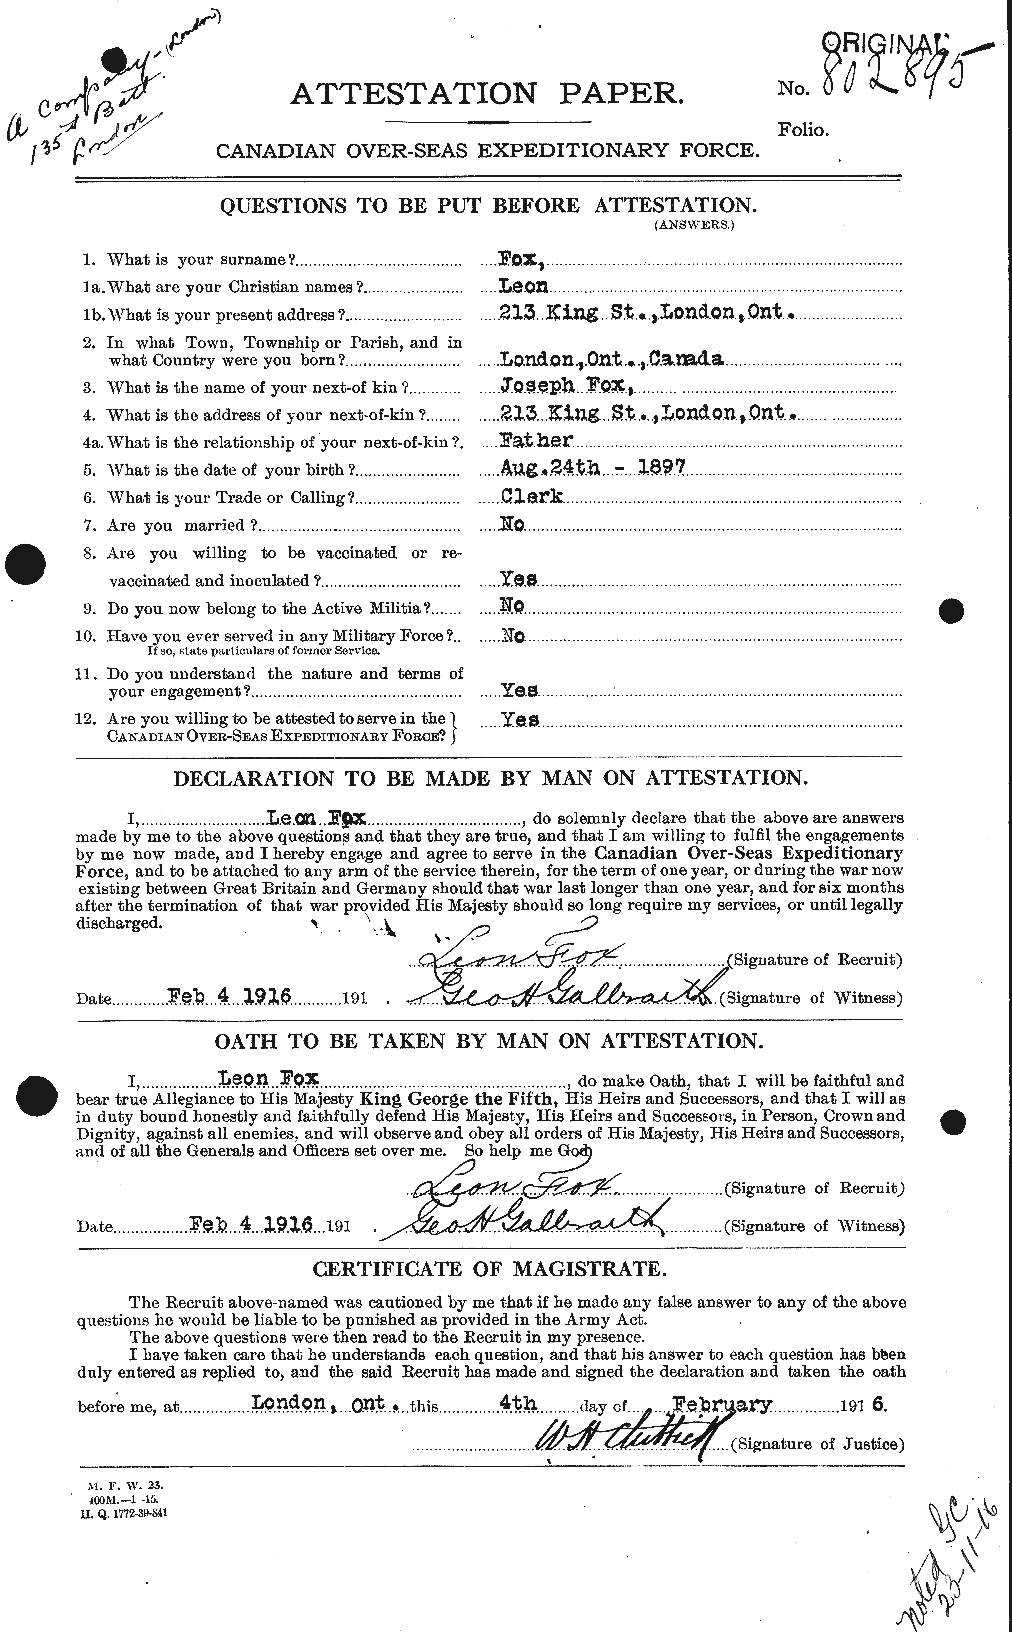 Personnel Records of the First World War - CEF 333533a